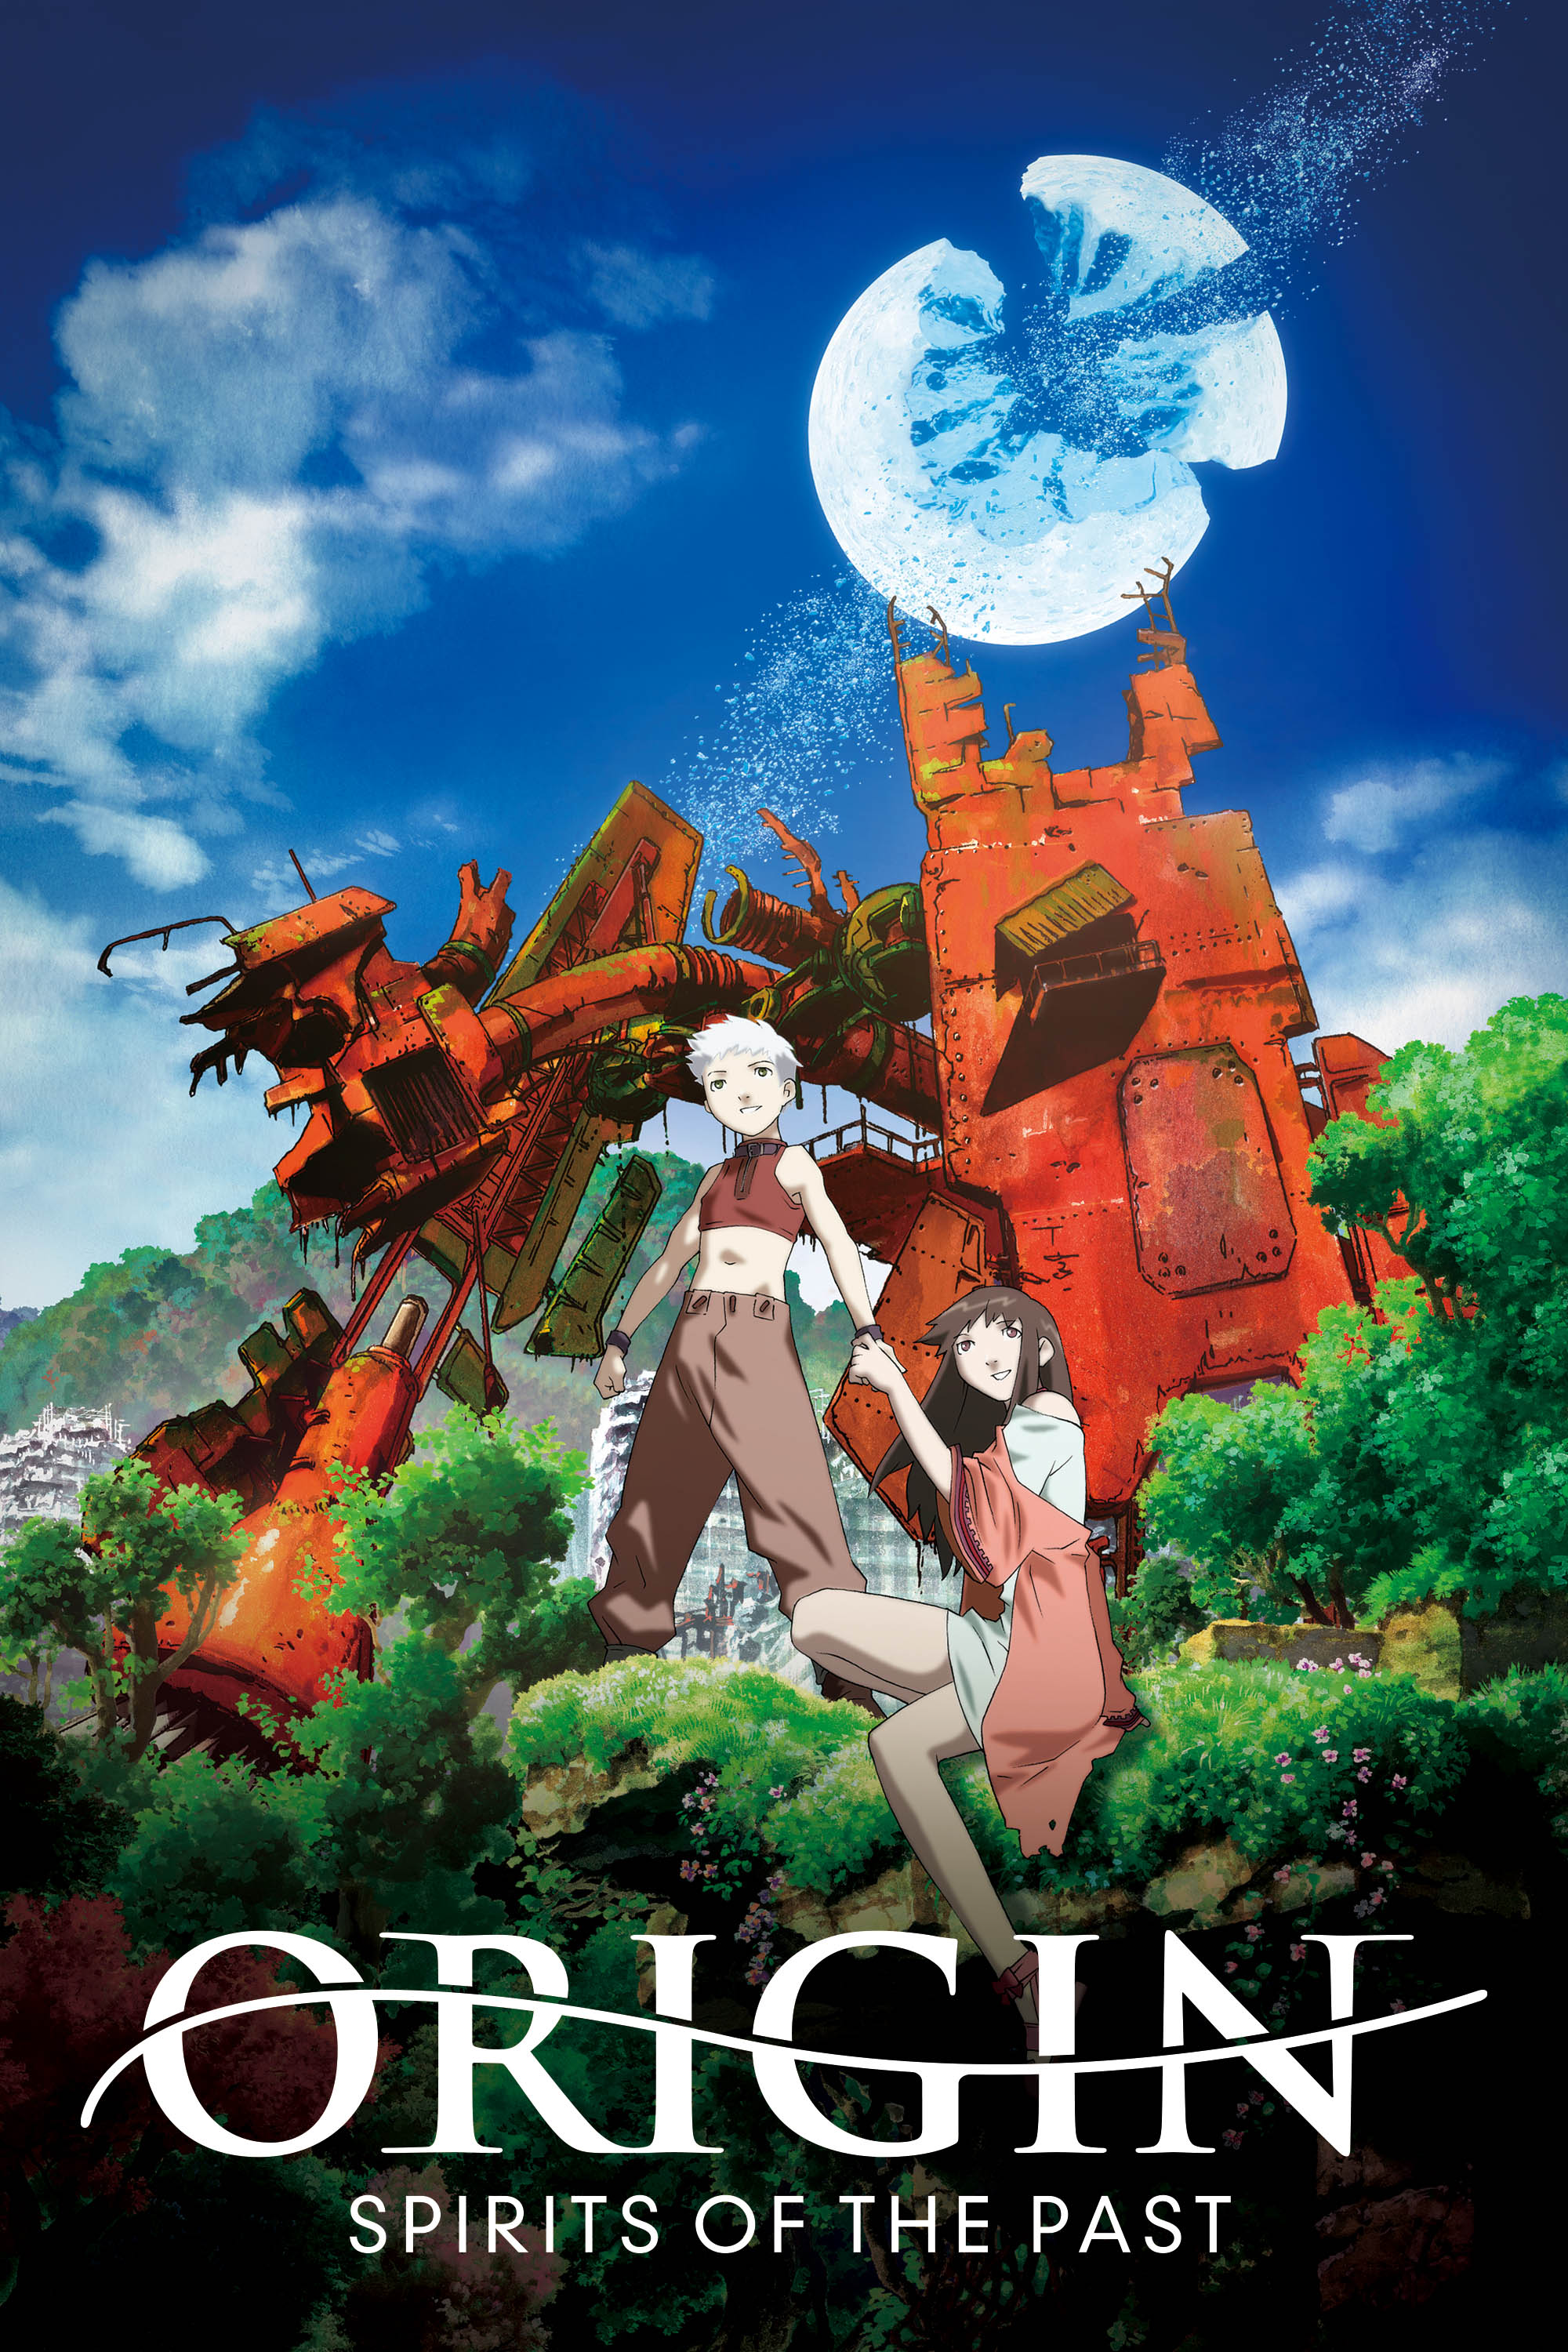 Watch Sword Art Online - Progressive, Laid-Back Camp The Movie and more anime movies on Crunchyroll